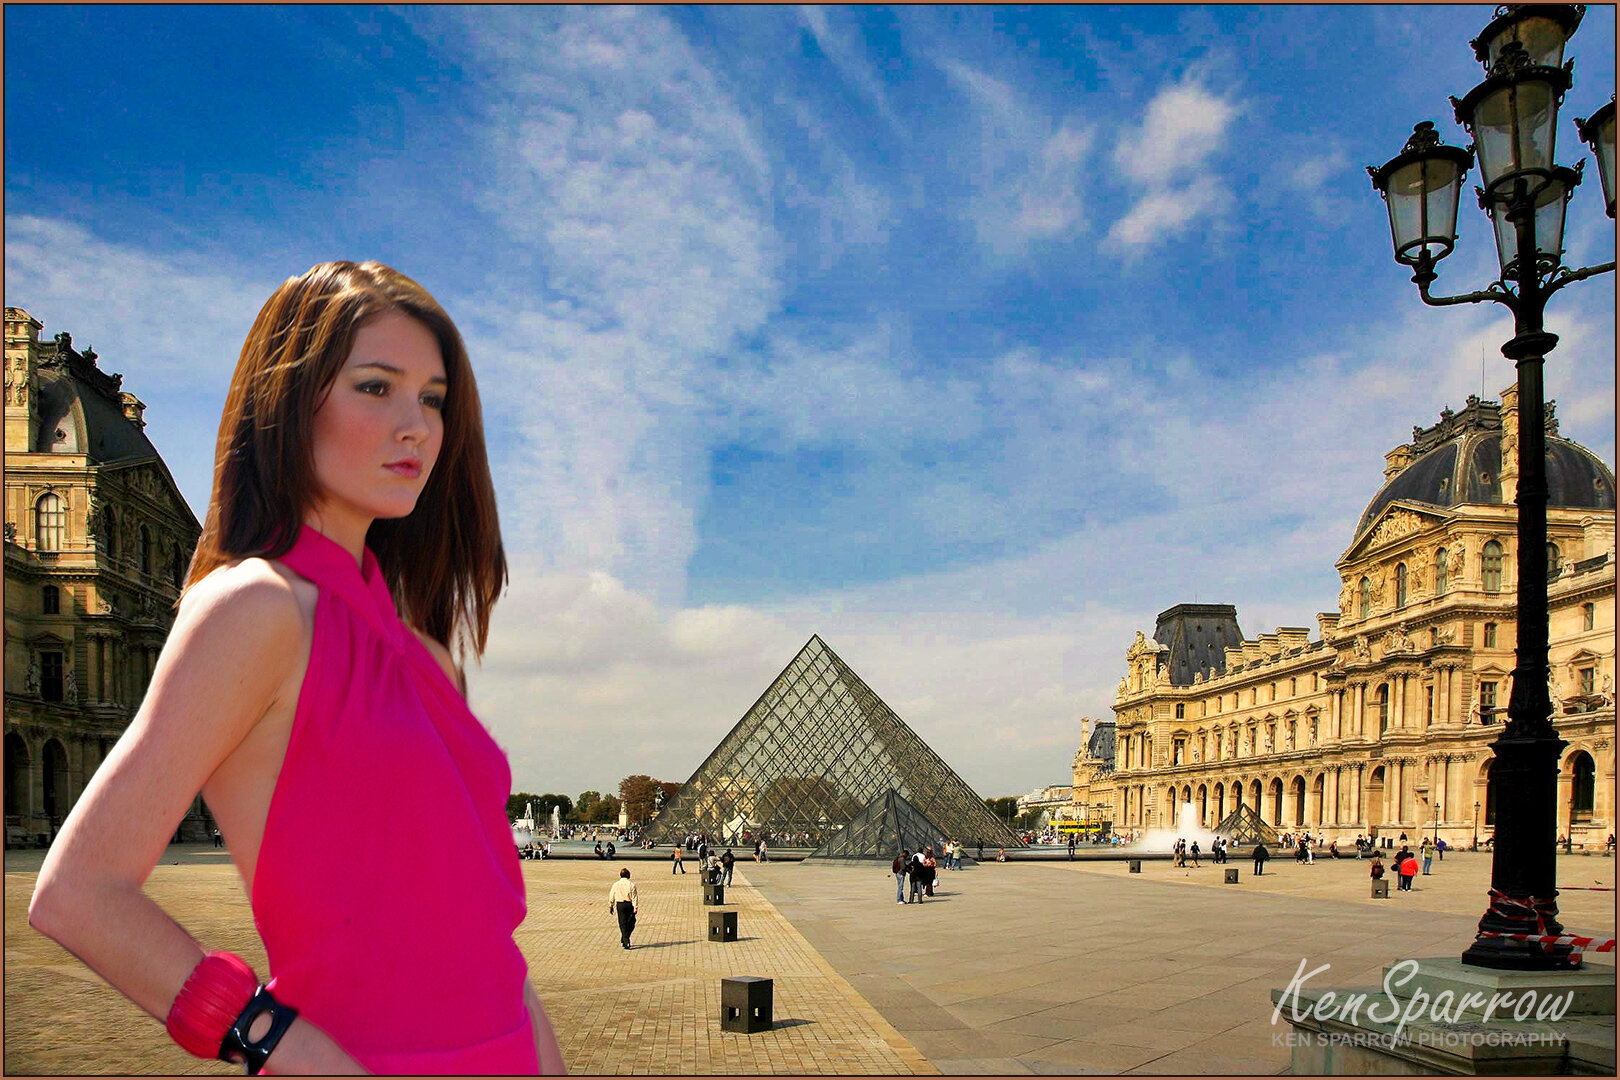 164 Katelyn at the Louvre